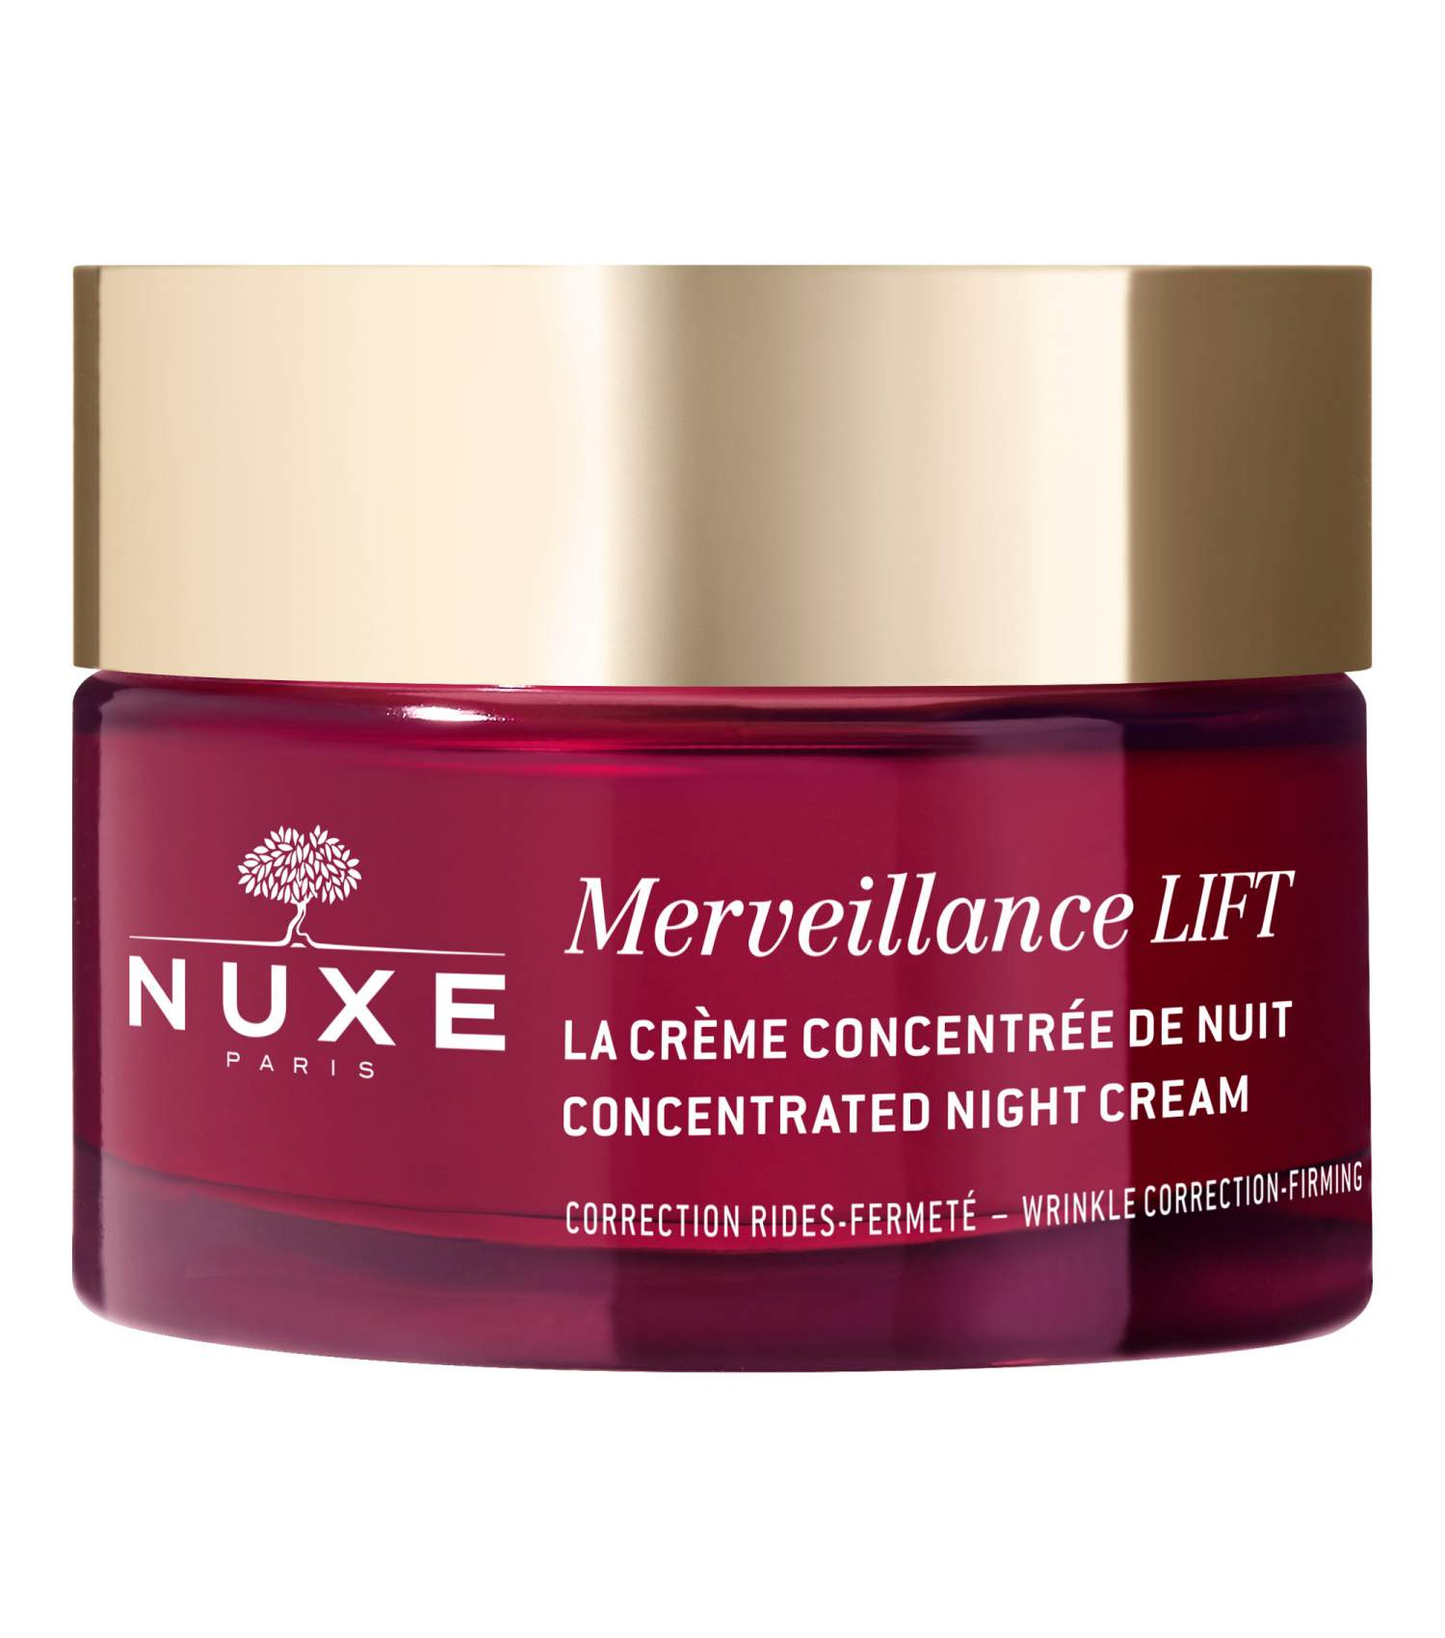 NUXE Merveillance® LIFT Concentrated Night Cream